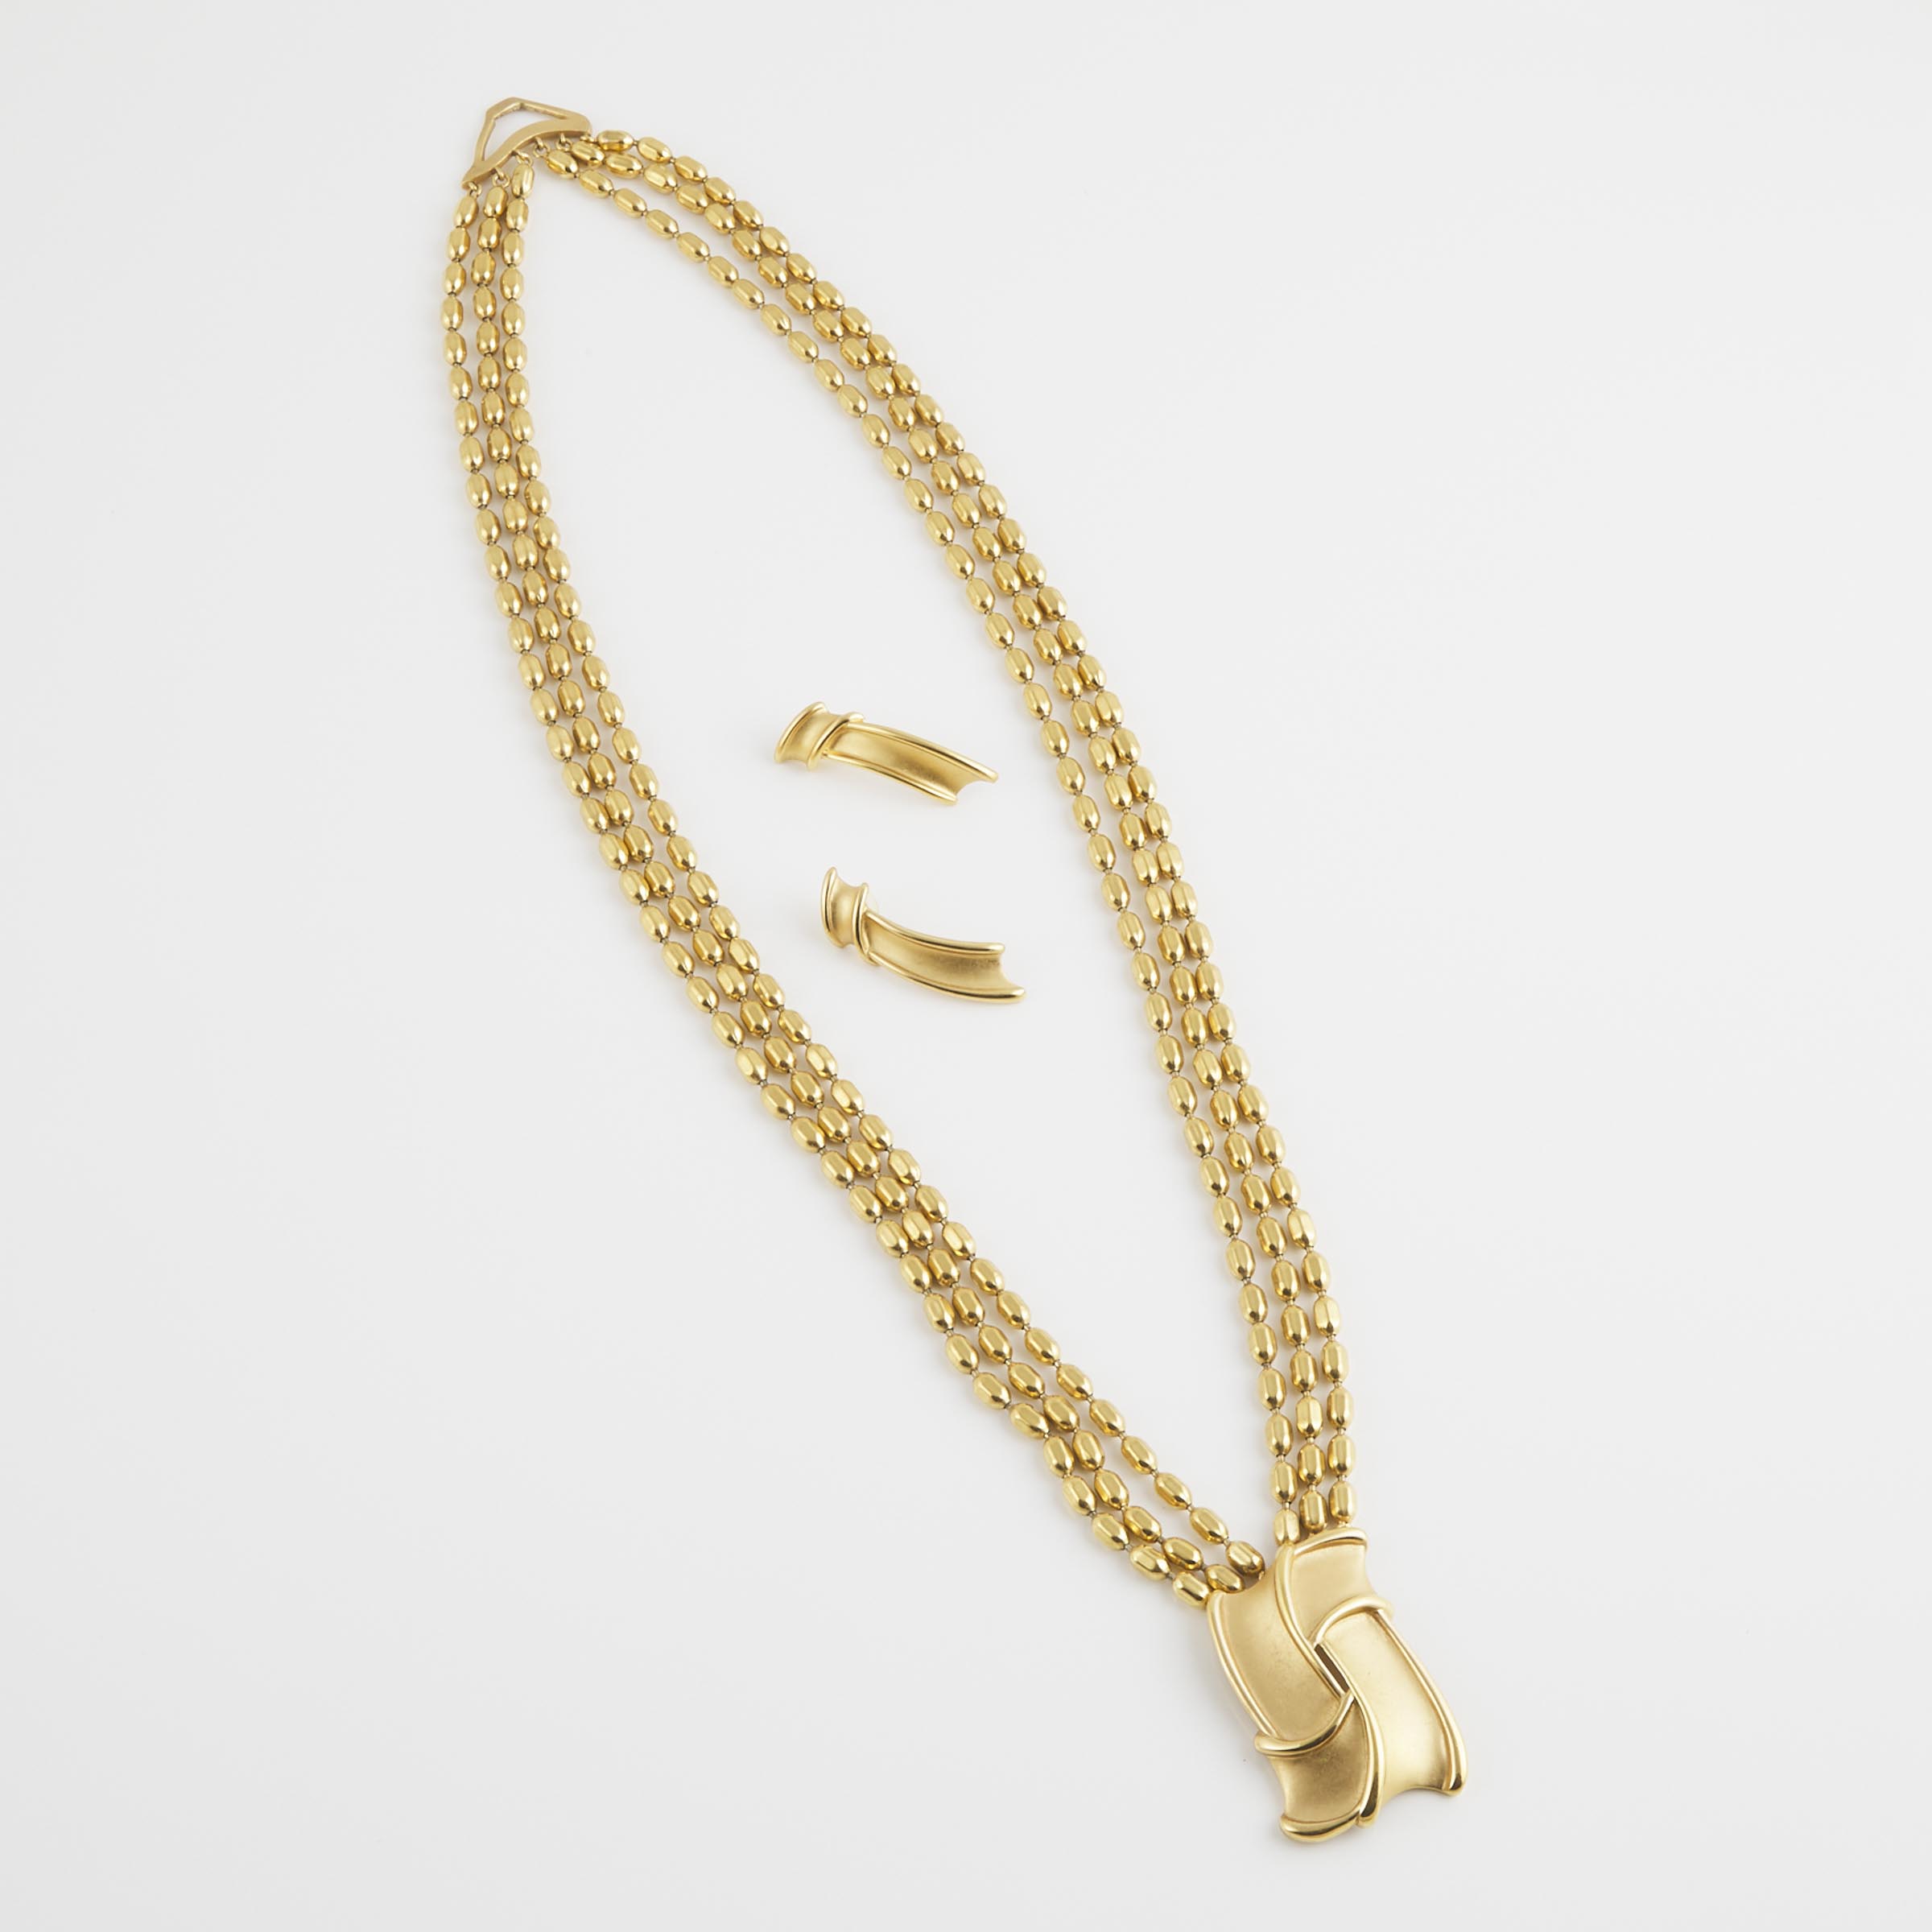 Yves Saint Laurent Gold-Tone Metal 6 Strand Necklace And Similar Earrings